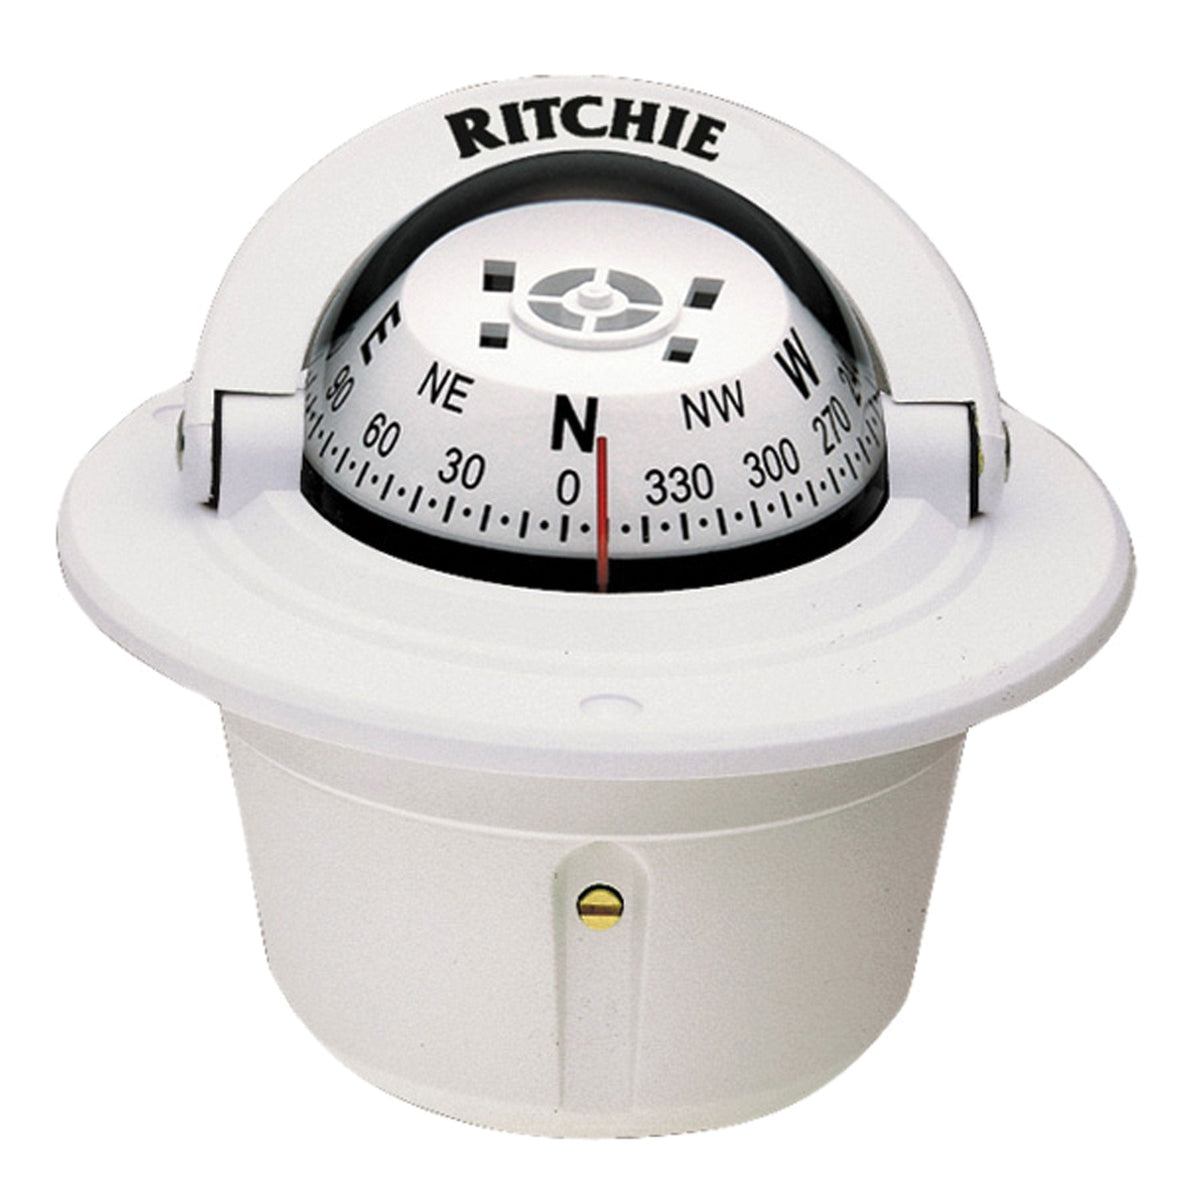 Ritchie Compass Qualifies for Free Shipping Ritchie Compass Explorer Compass Flush Mount White with White Dial #F-50W-1